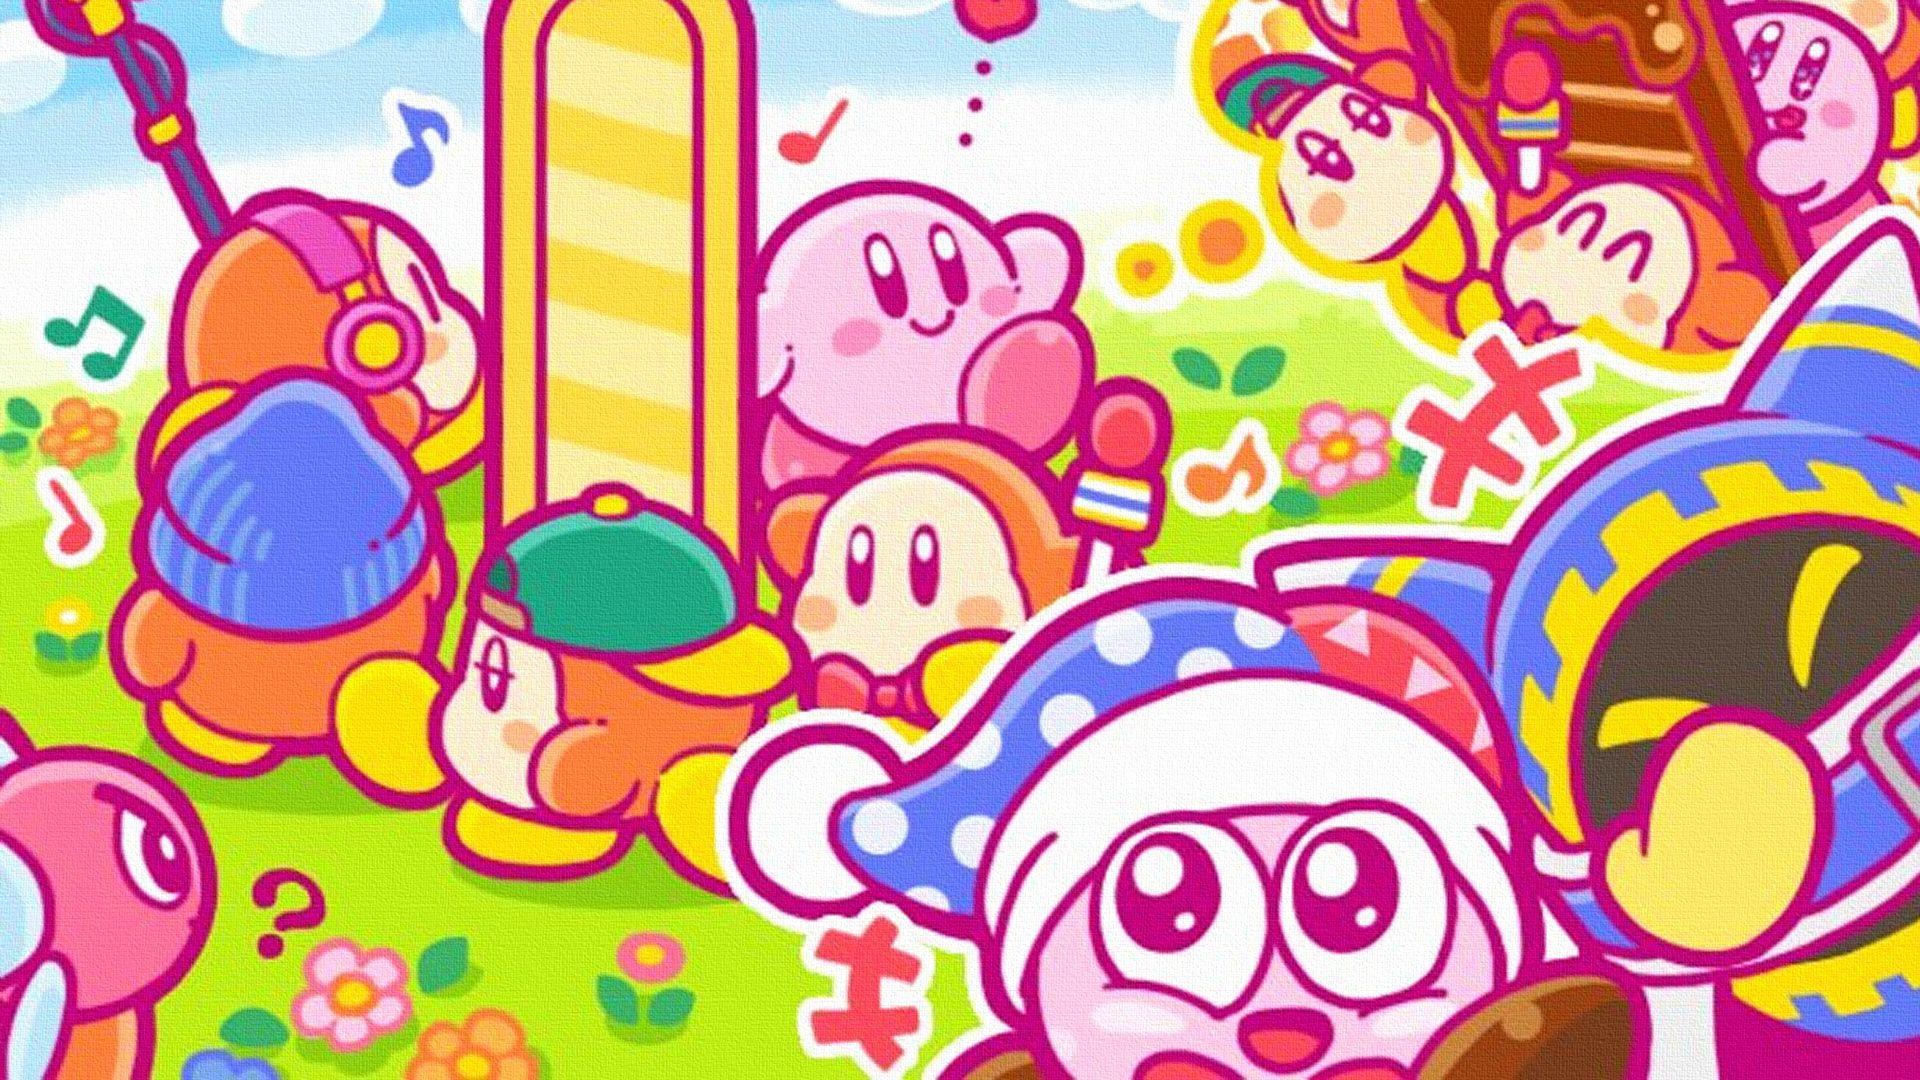 Kirby 25th Anniversary Twitter shares a new image for April Fools